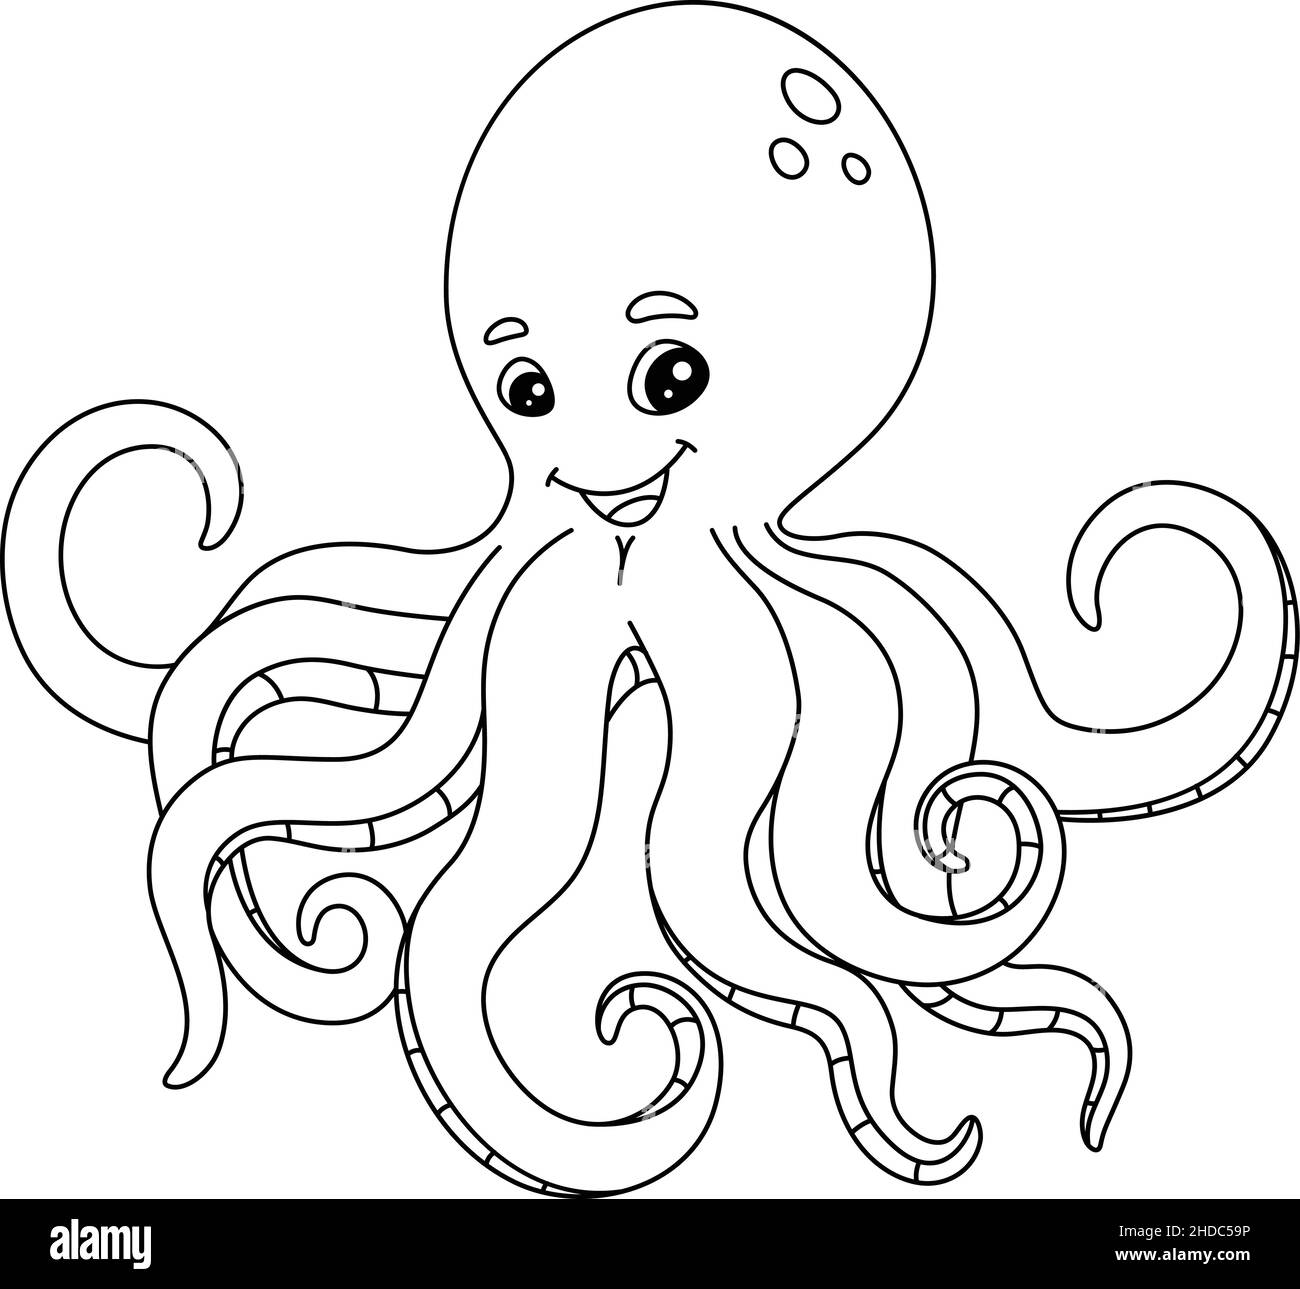 Octopus Coloring Page Isolated for Kids Stock Vector